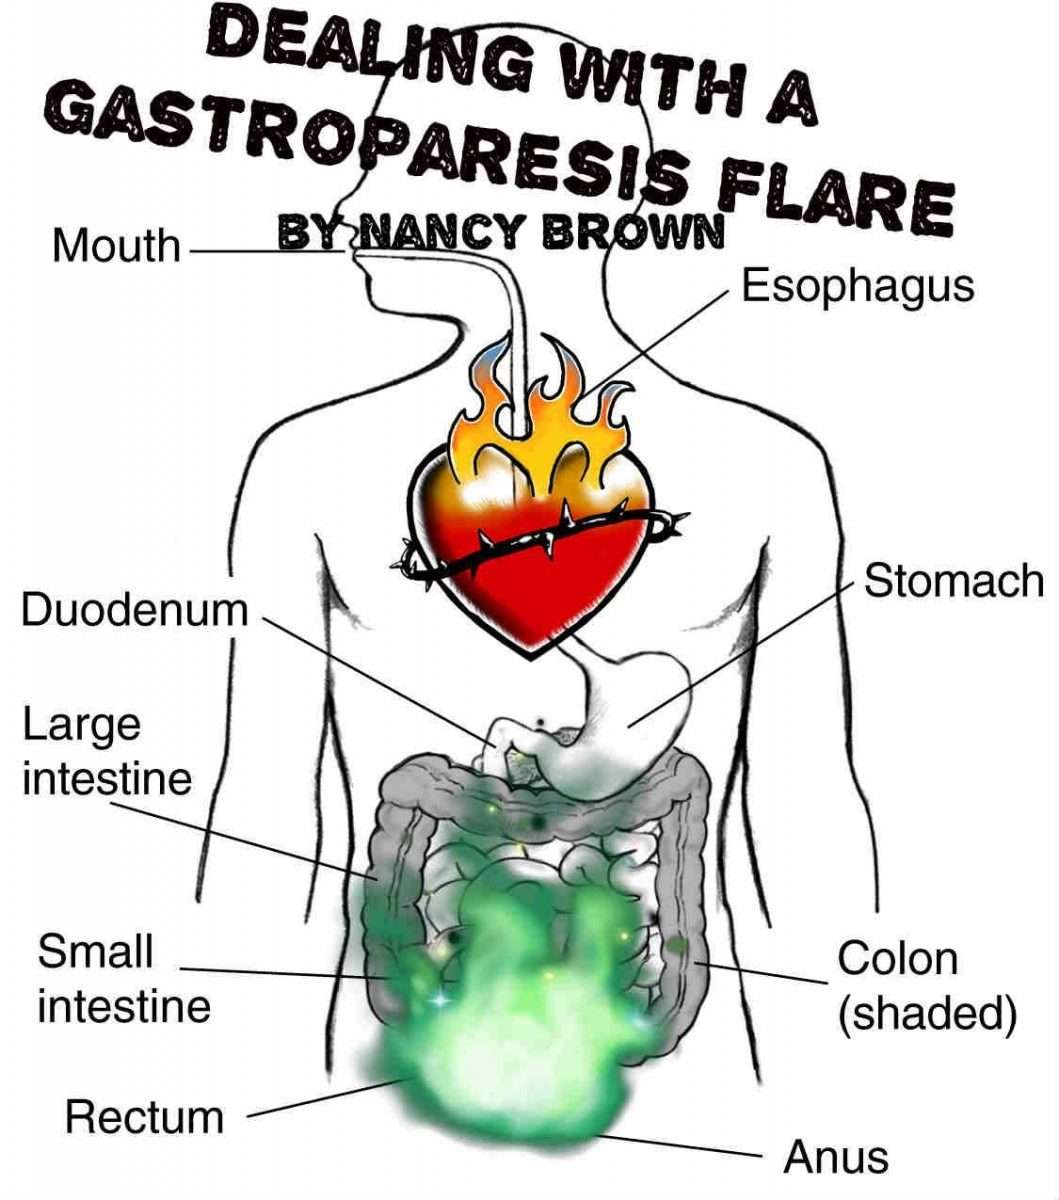 Dealing with a Gastroparesis Flare by Nancy Brown 7/3/17 What is a ...